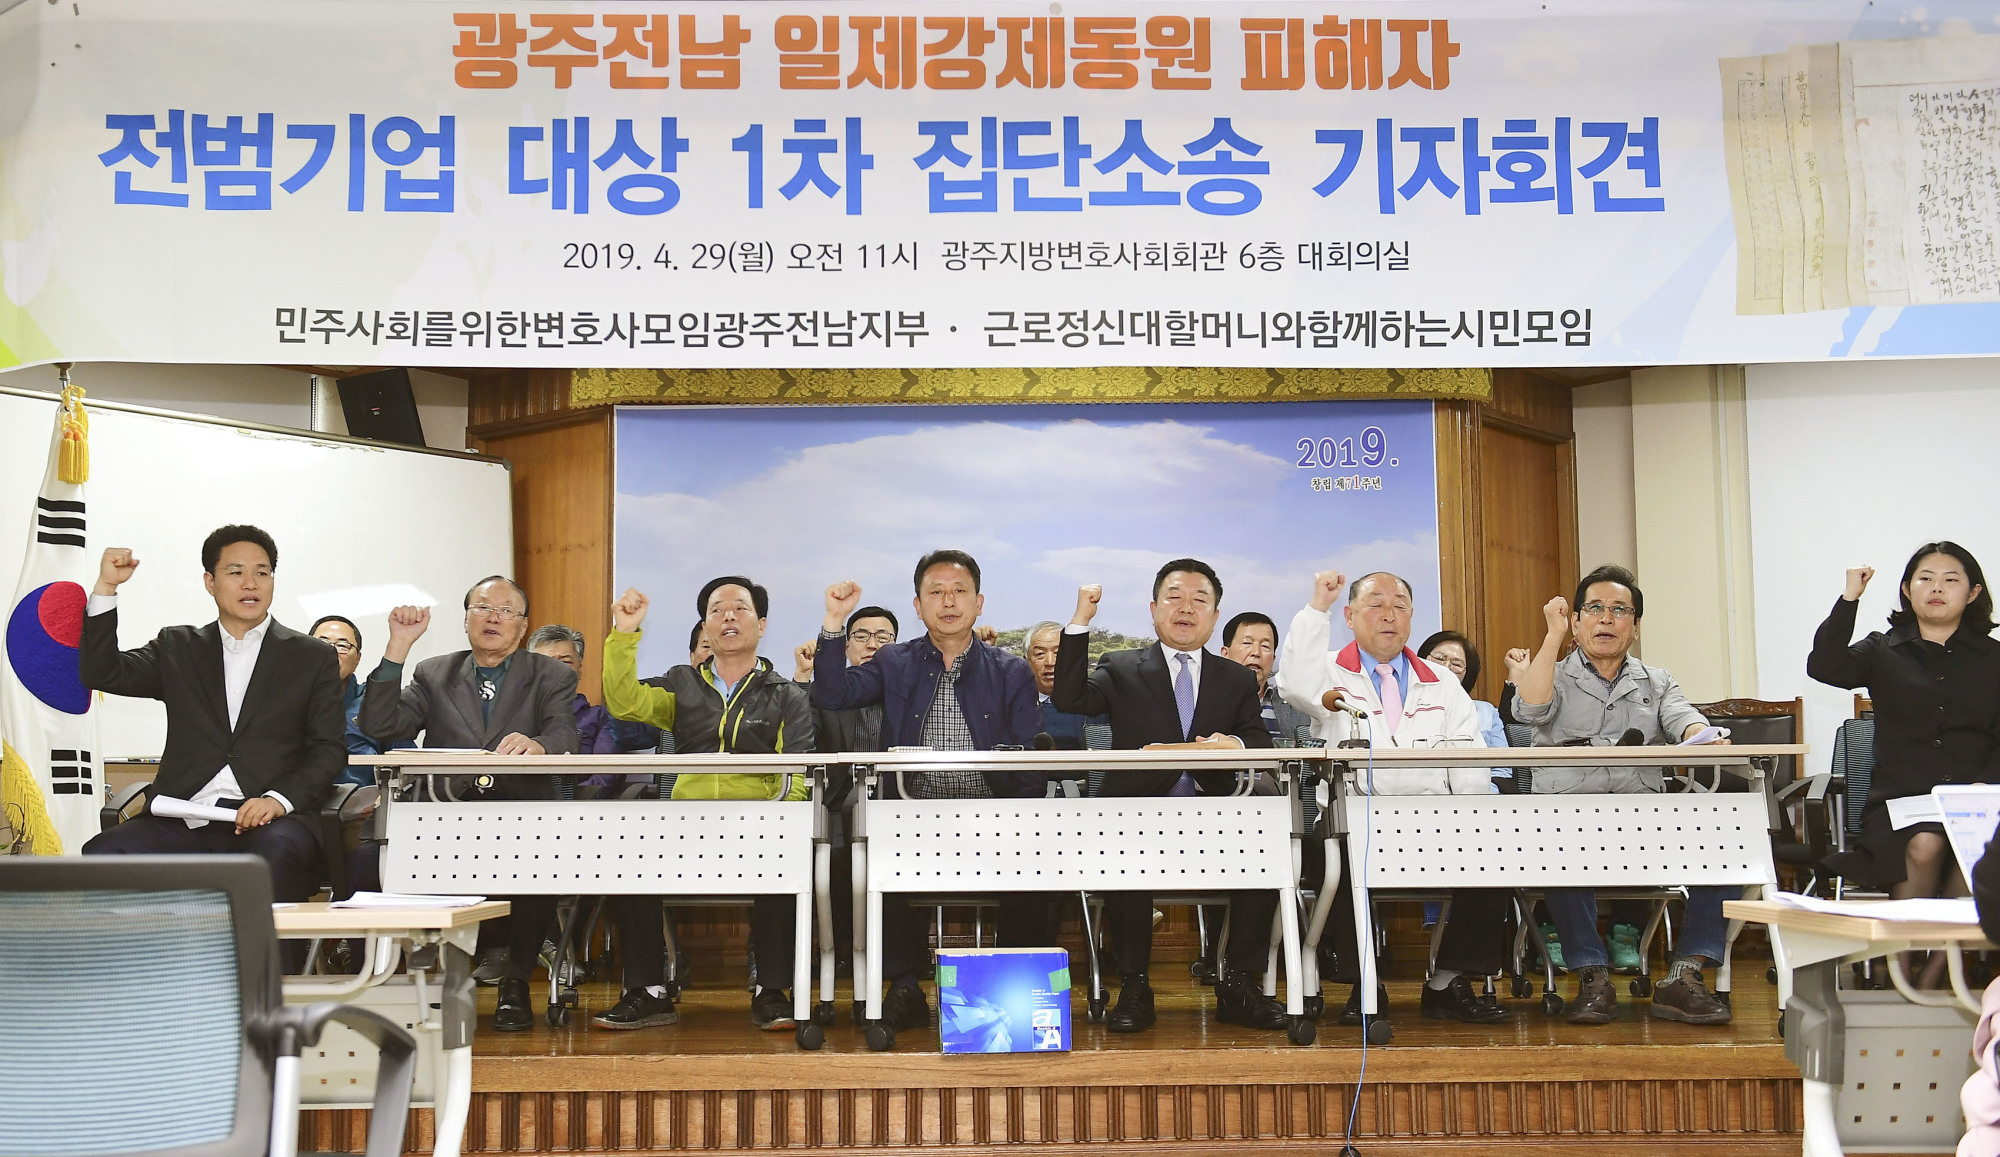 South Koreans and their lawyers filing lawsuits against Japanese firms over wartime labor attend a news conference in Gwangju on Monday. | KYODO